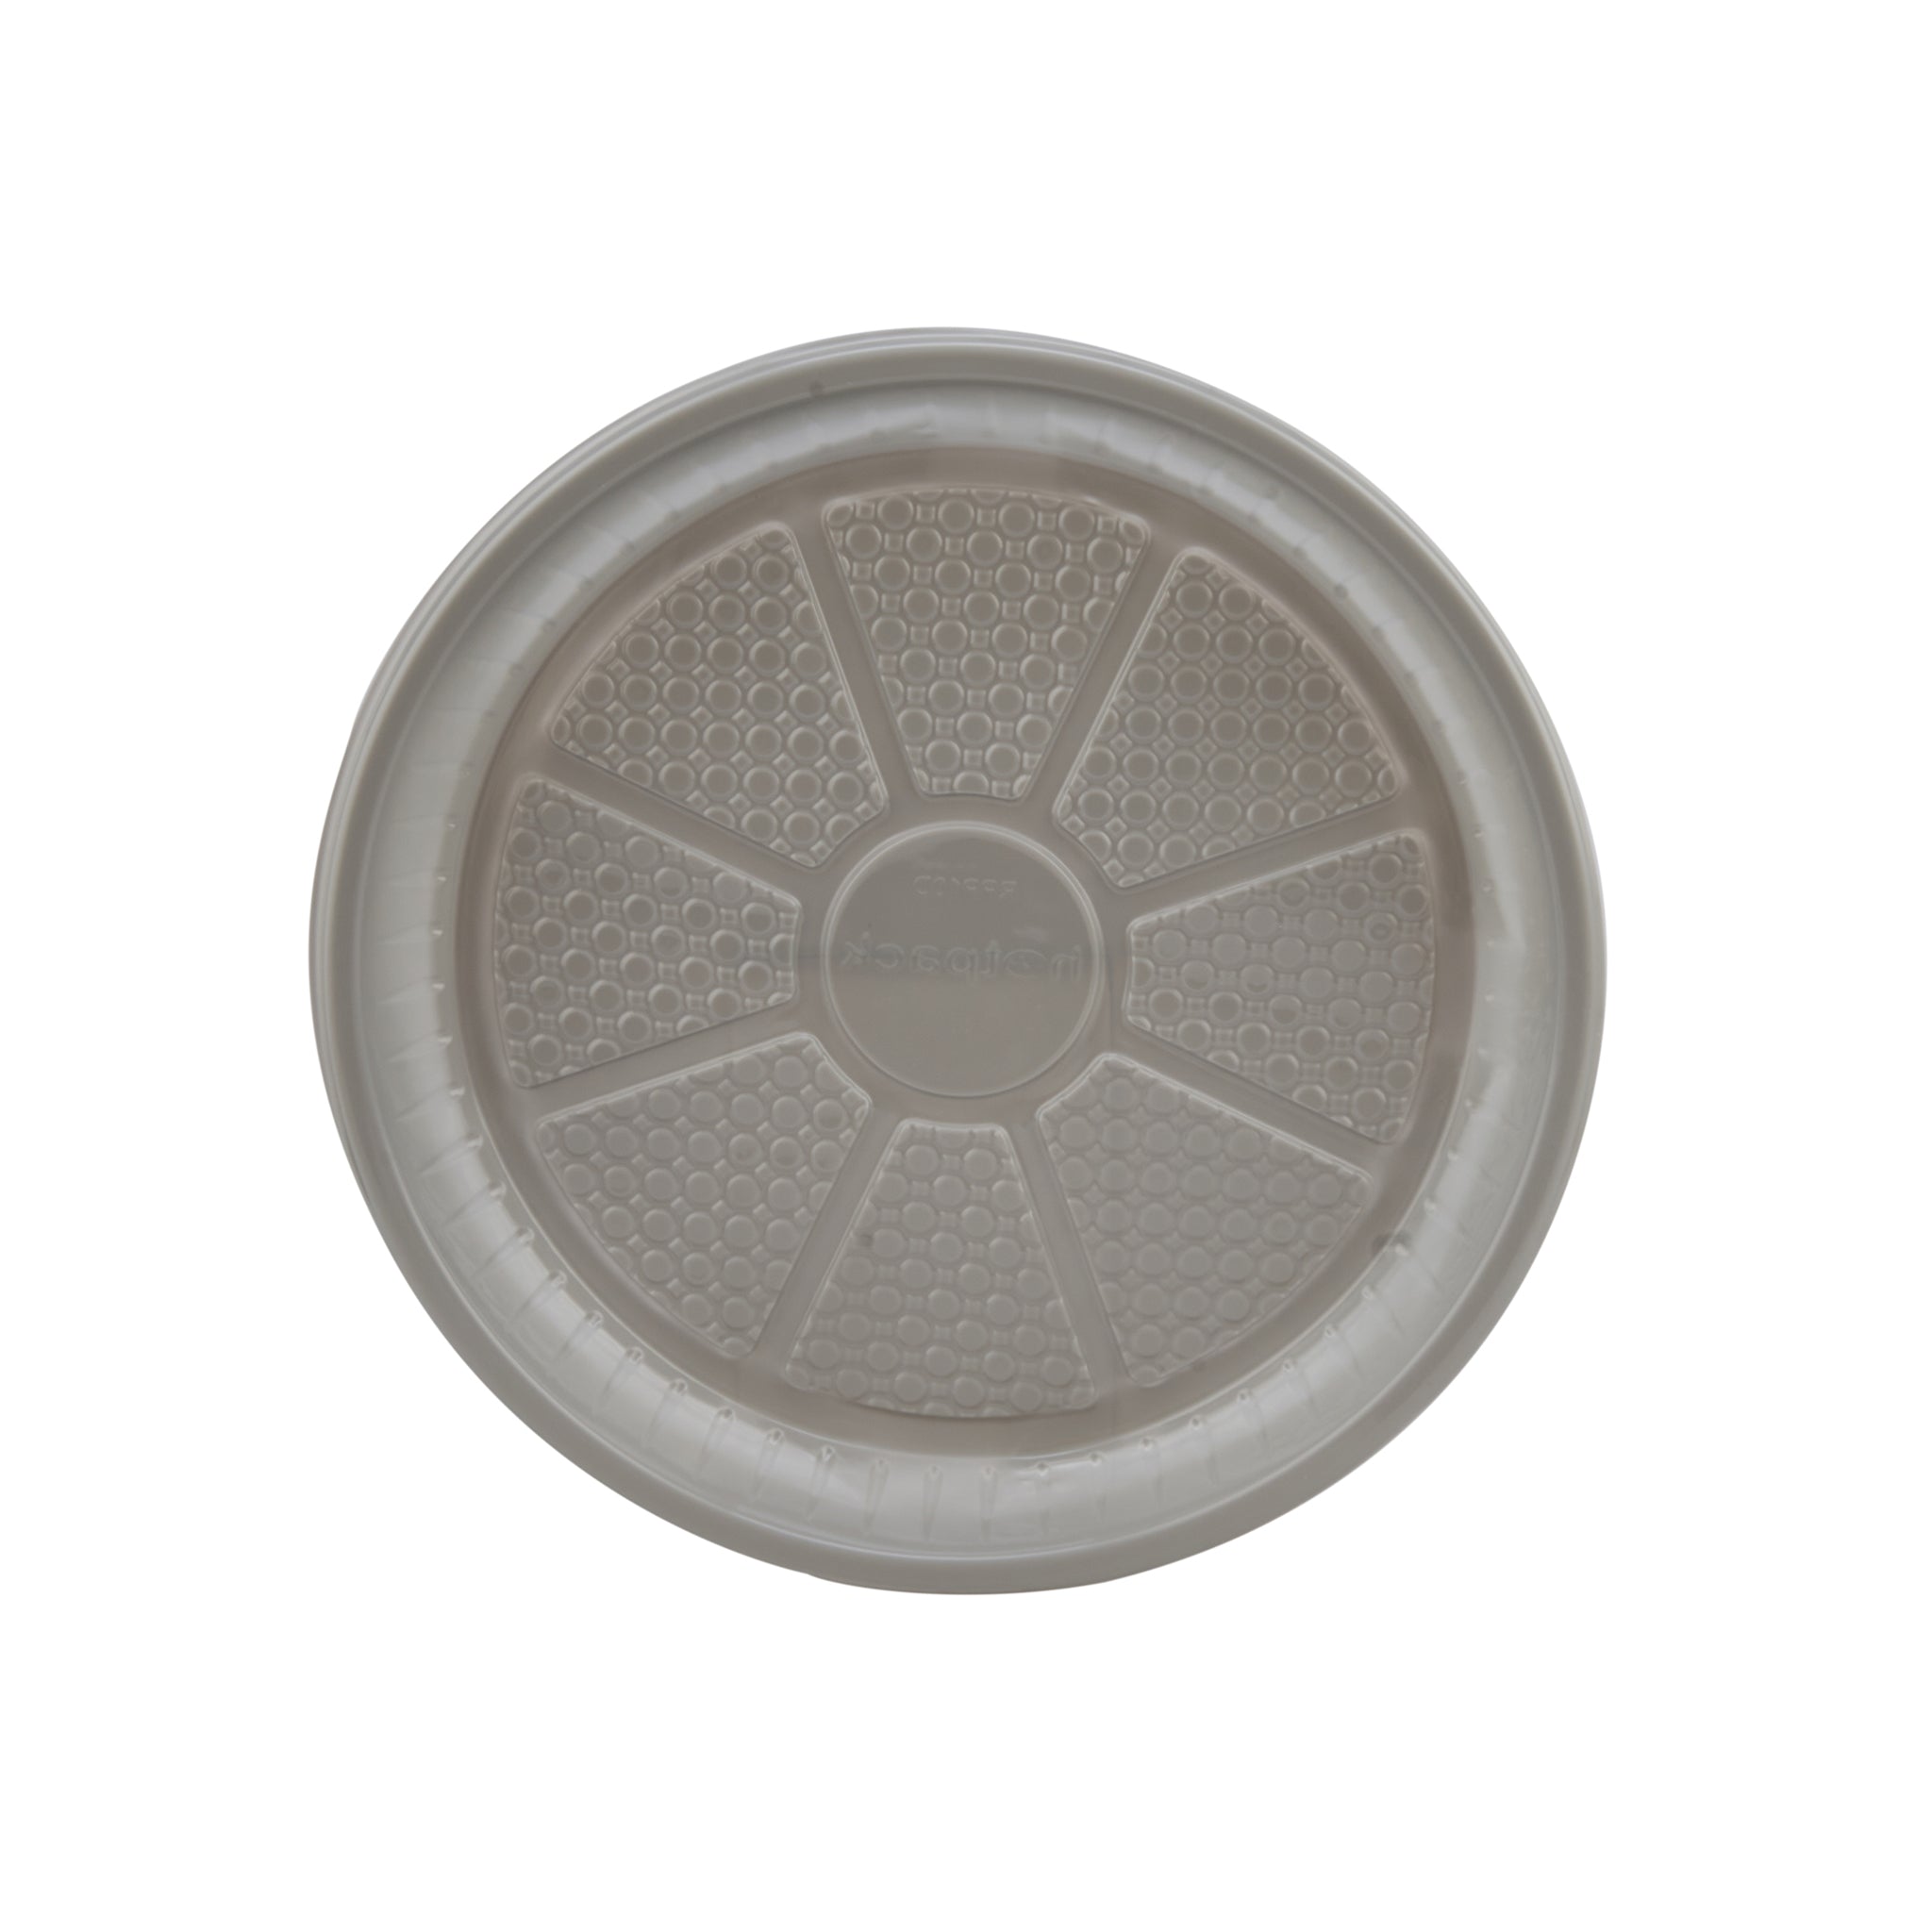 Grey Colored Round Plastic Plate - Hotpack Global